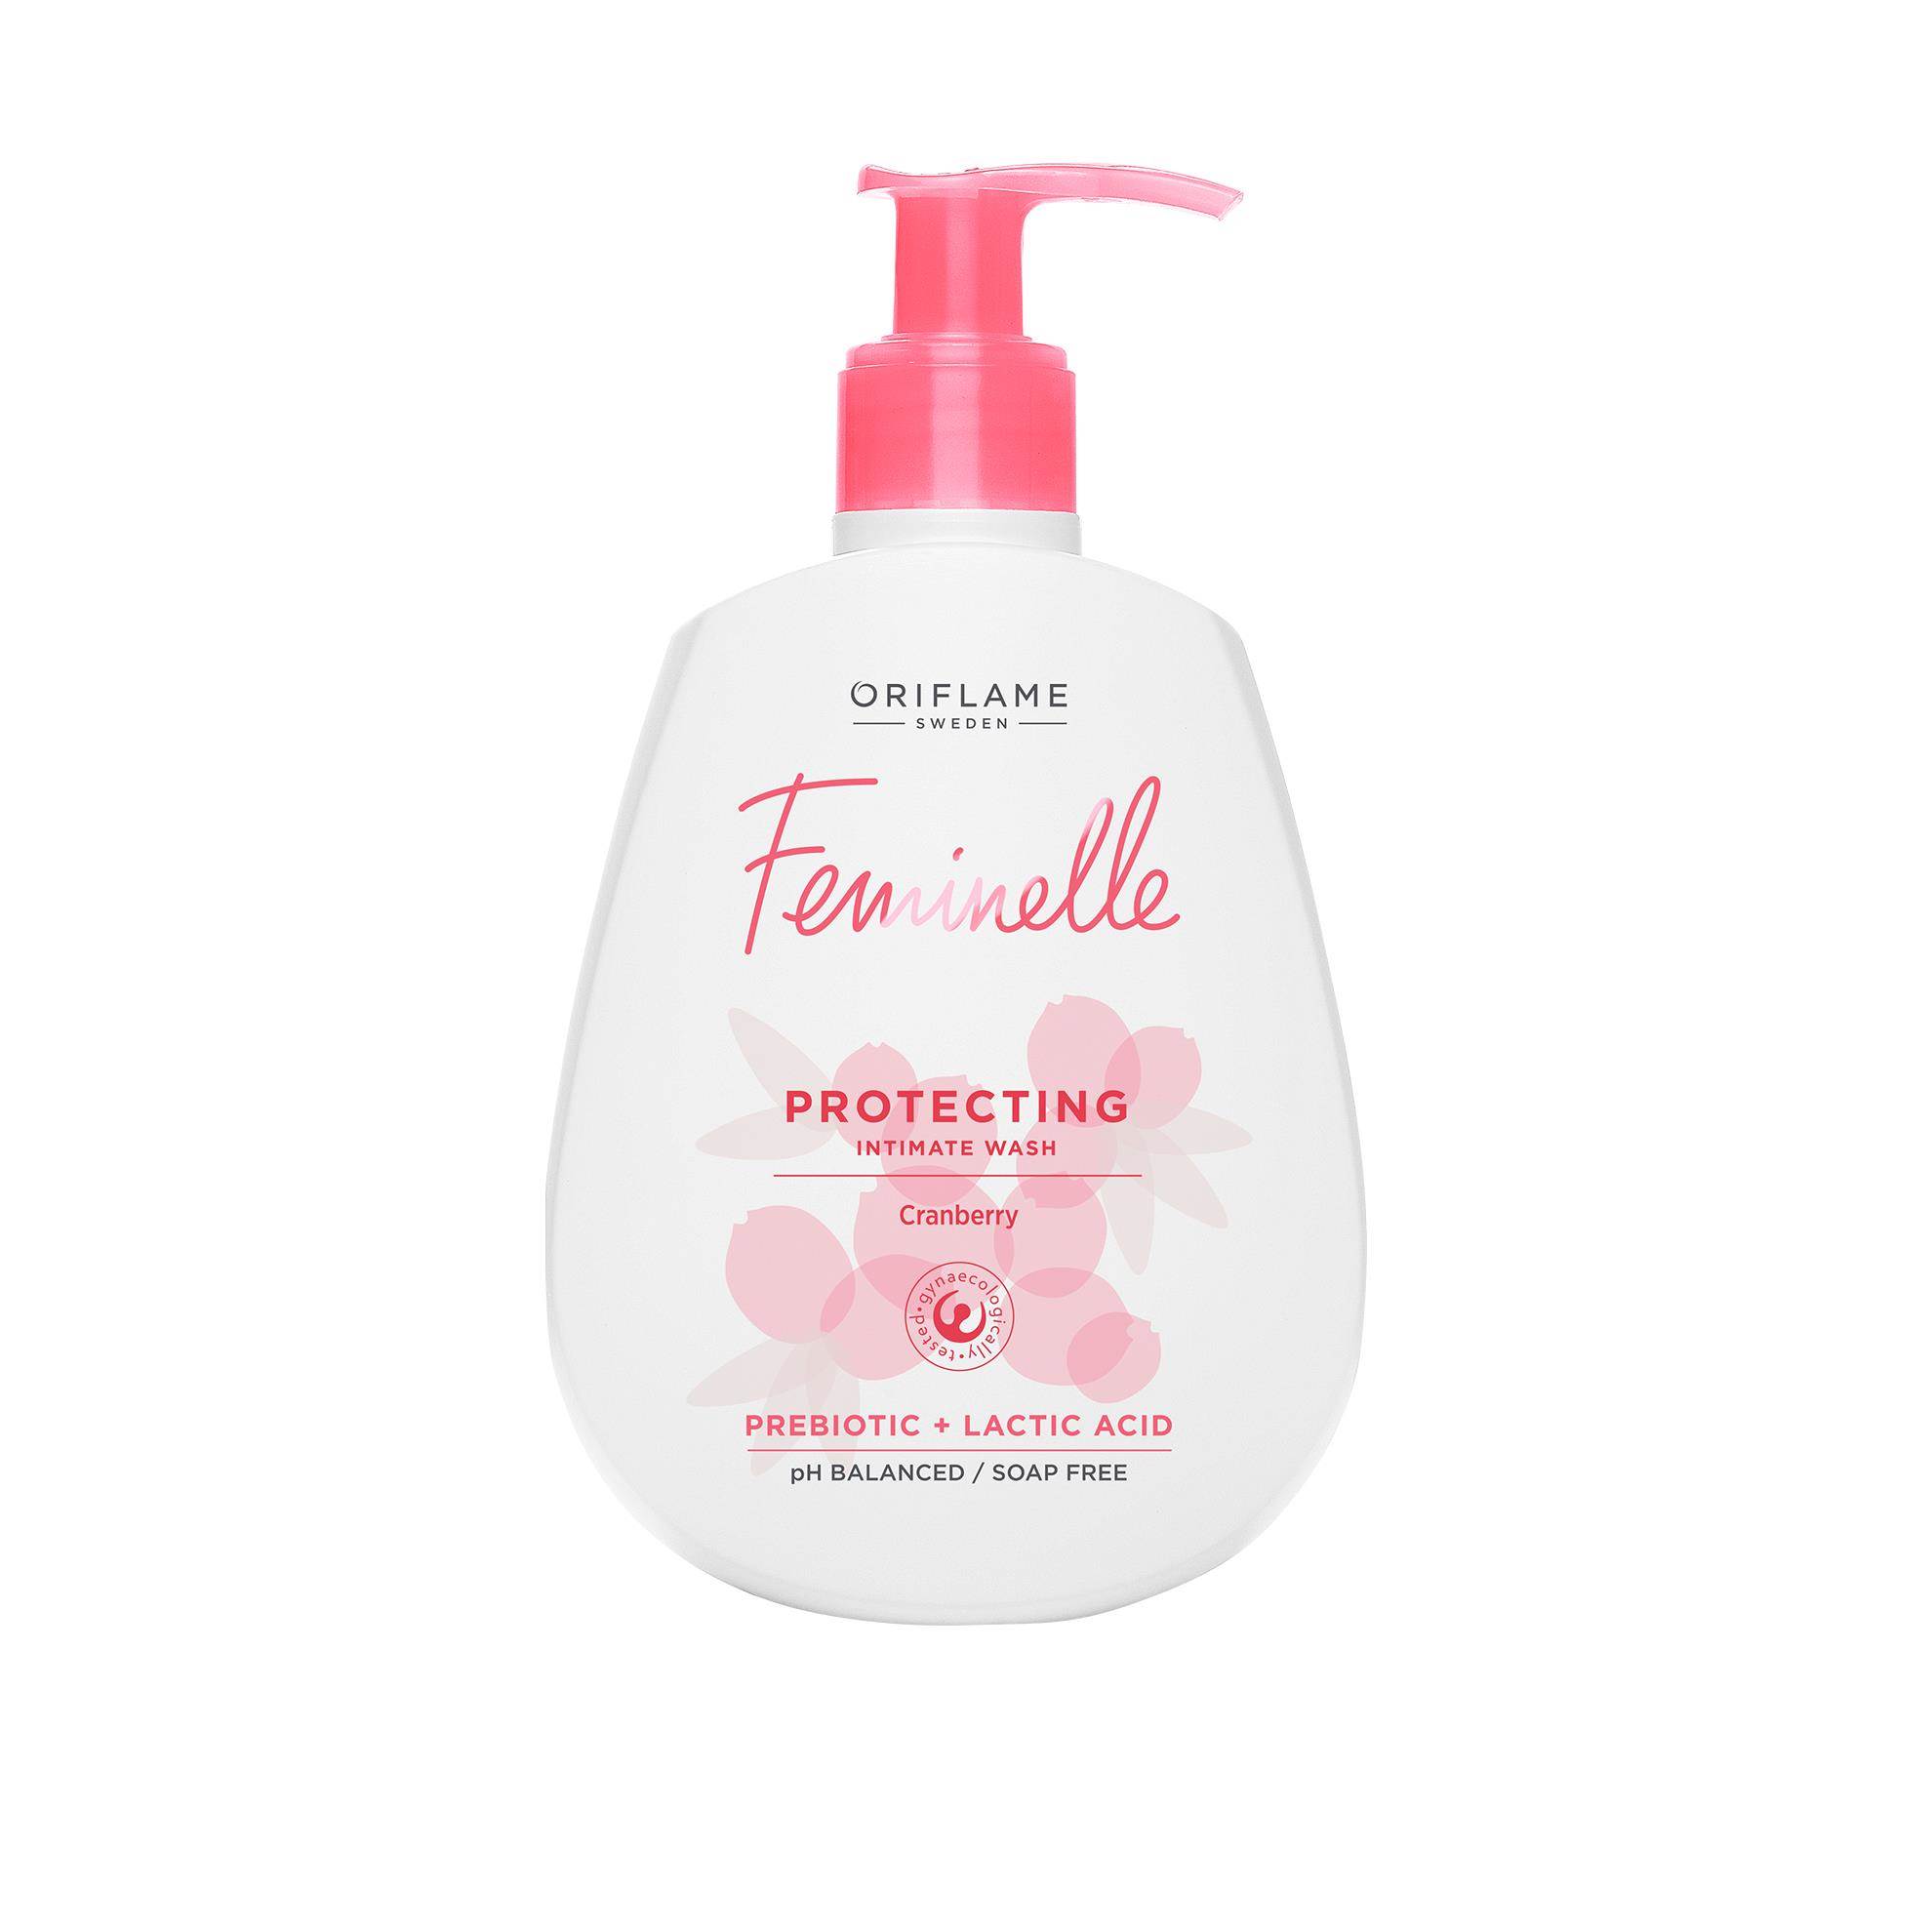 feminelle-protecting-intimate-wash-cranberry